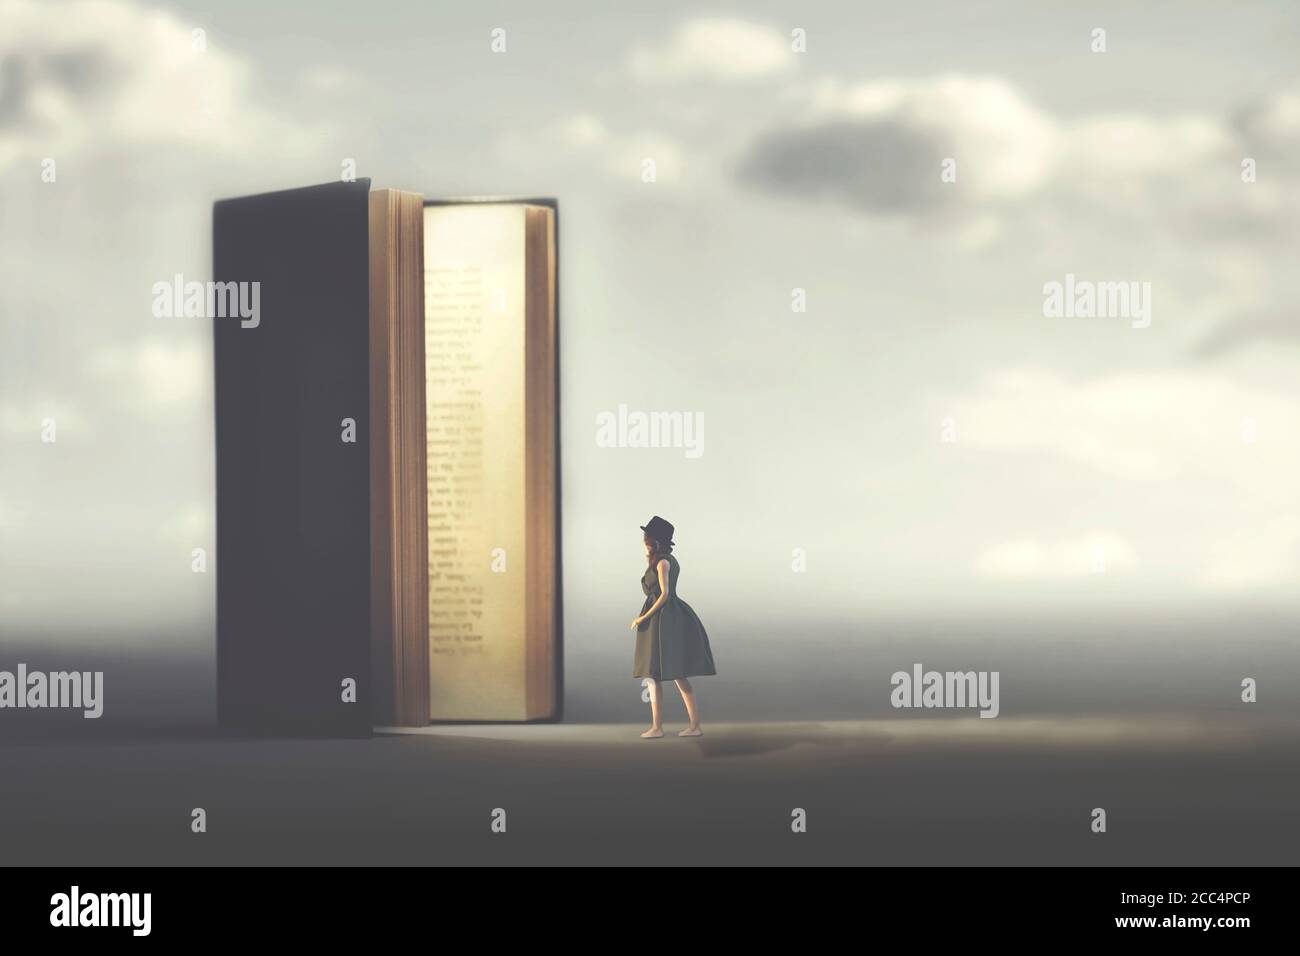 surreal book opens a door illuminated to a woman, concept of way to freedom Stock Photo